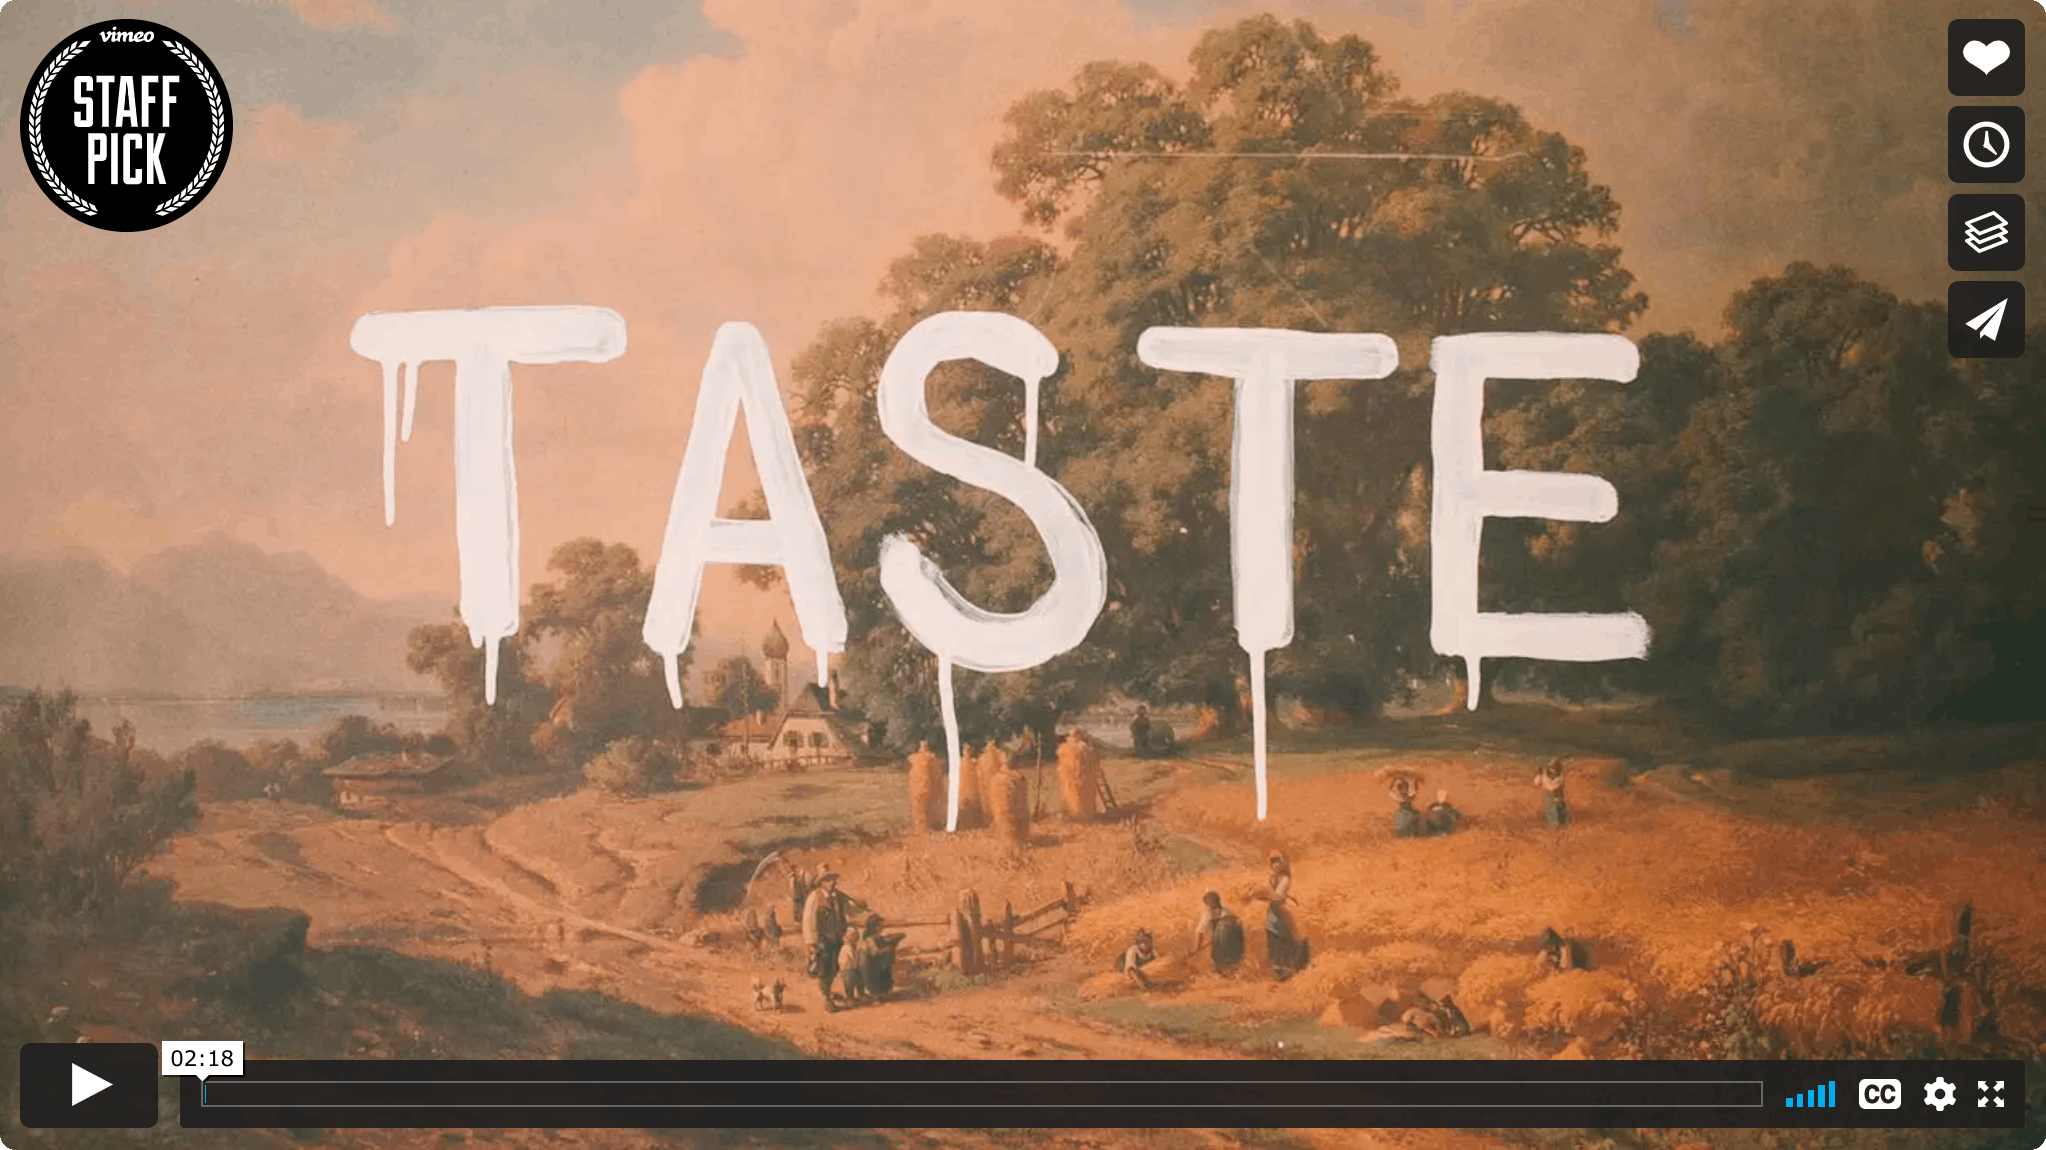 Screenshot of the first frame of a video, showing the word 'TASTE' painted over a landscape image